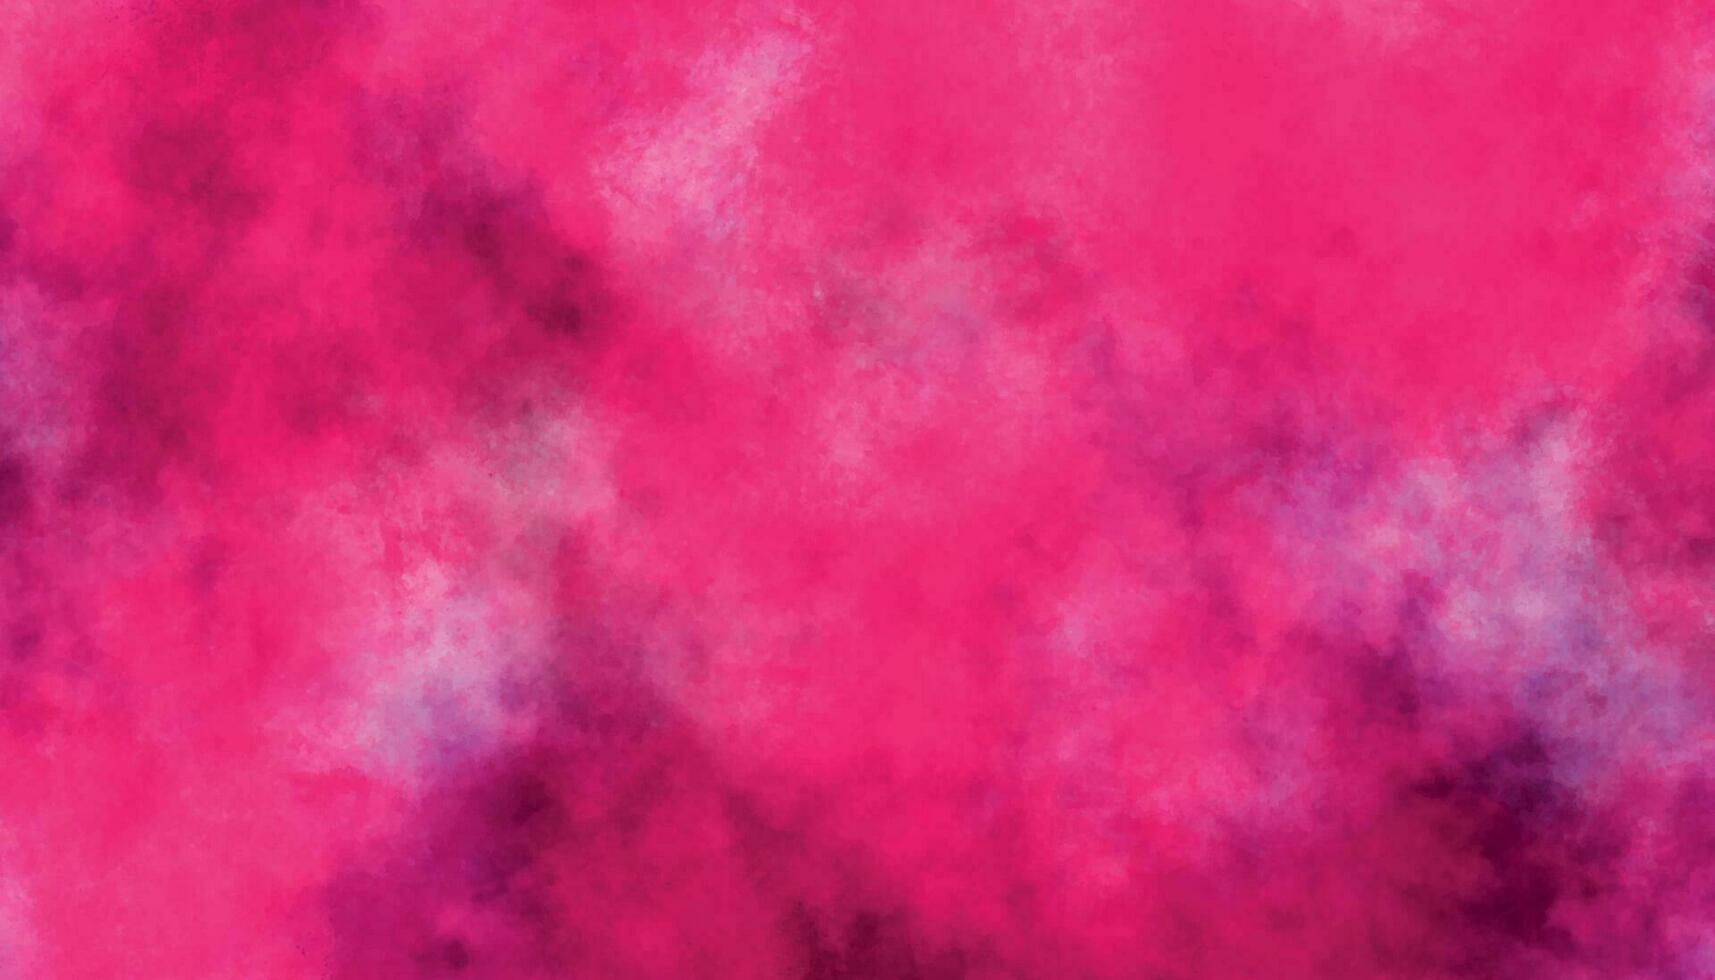 Pink Background. Pink Watercolor Background. Abstract Colorful Grunge Texture vector